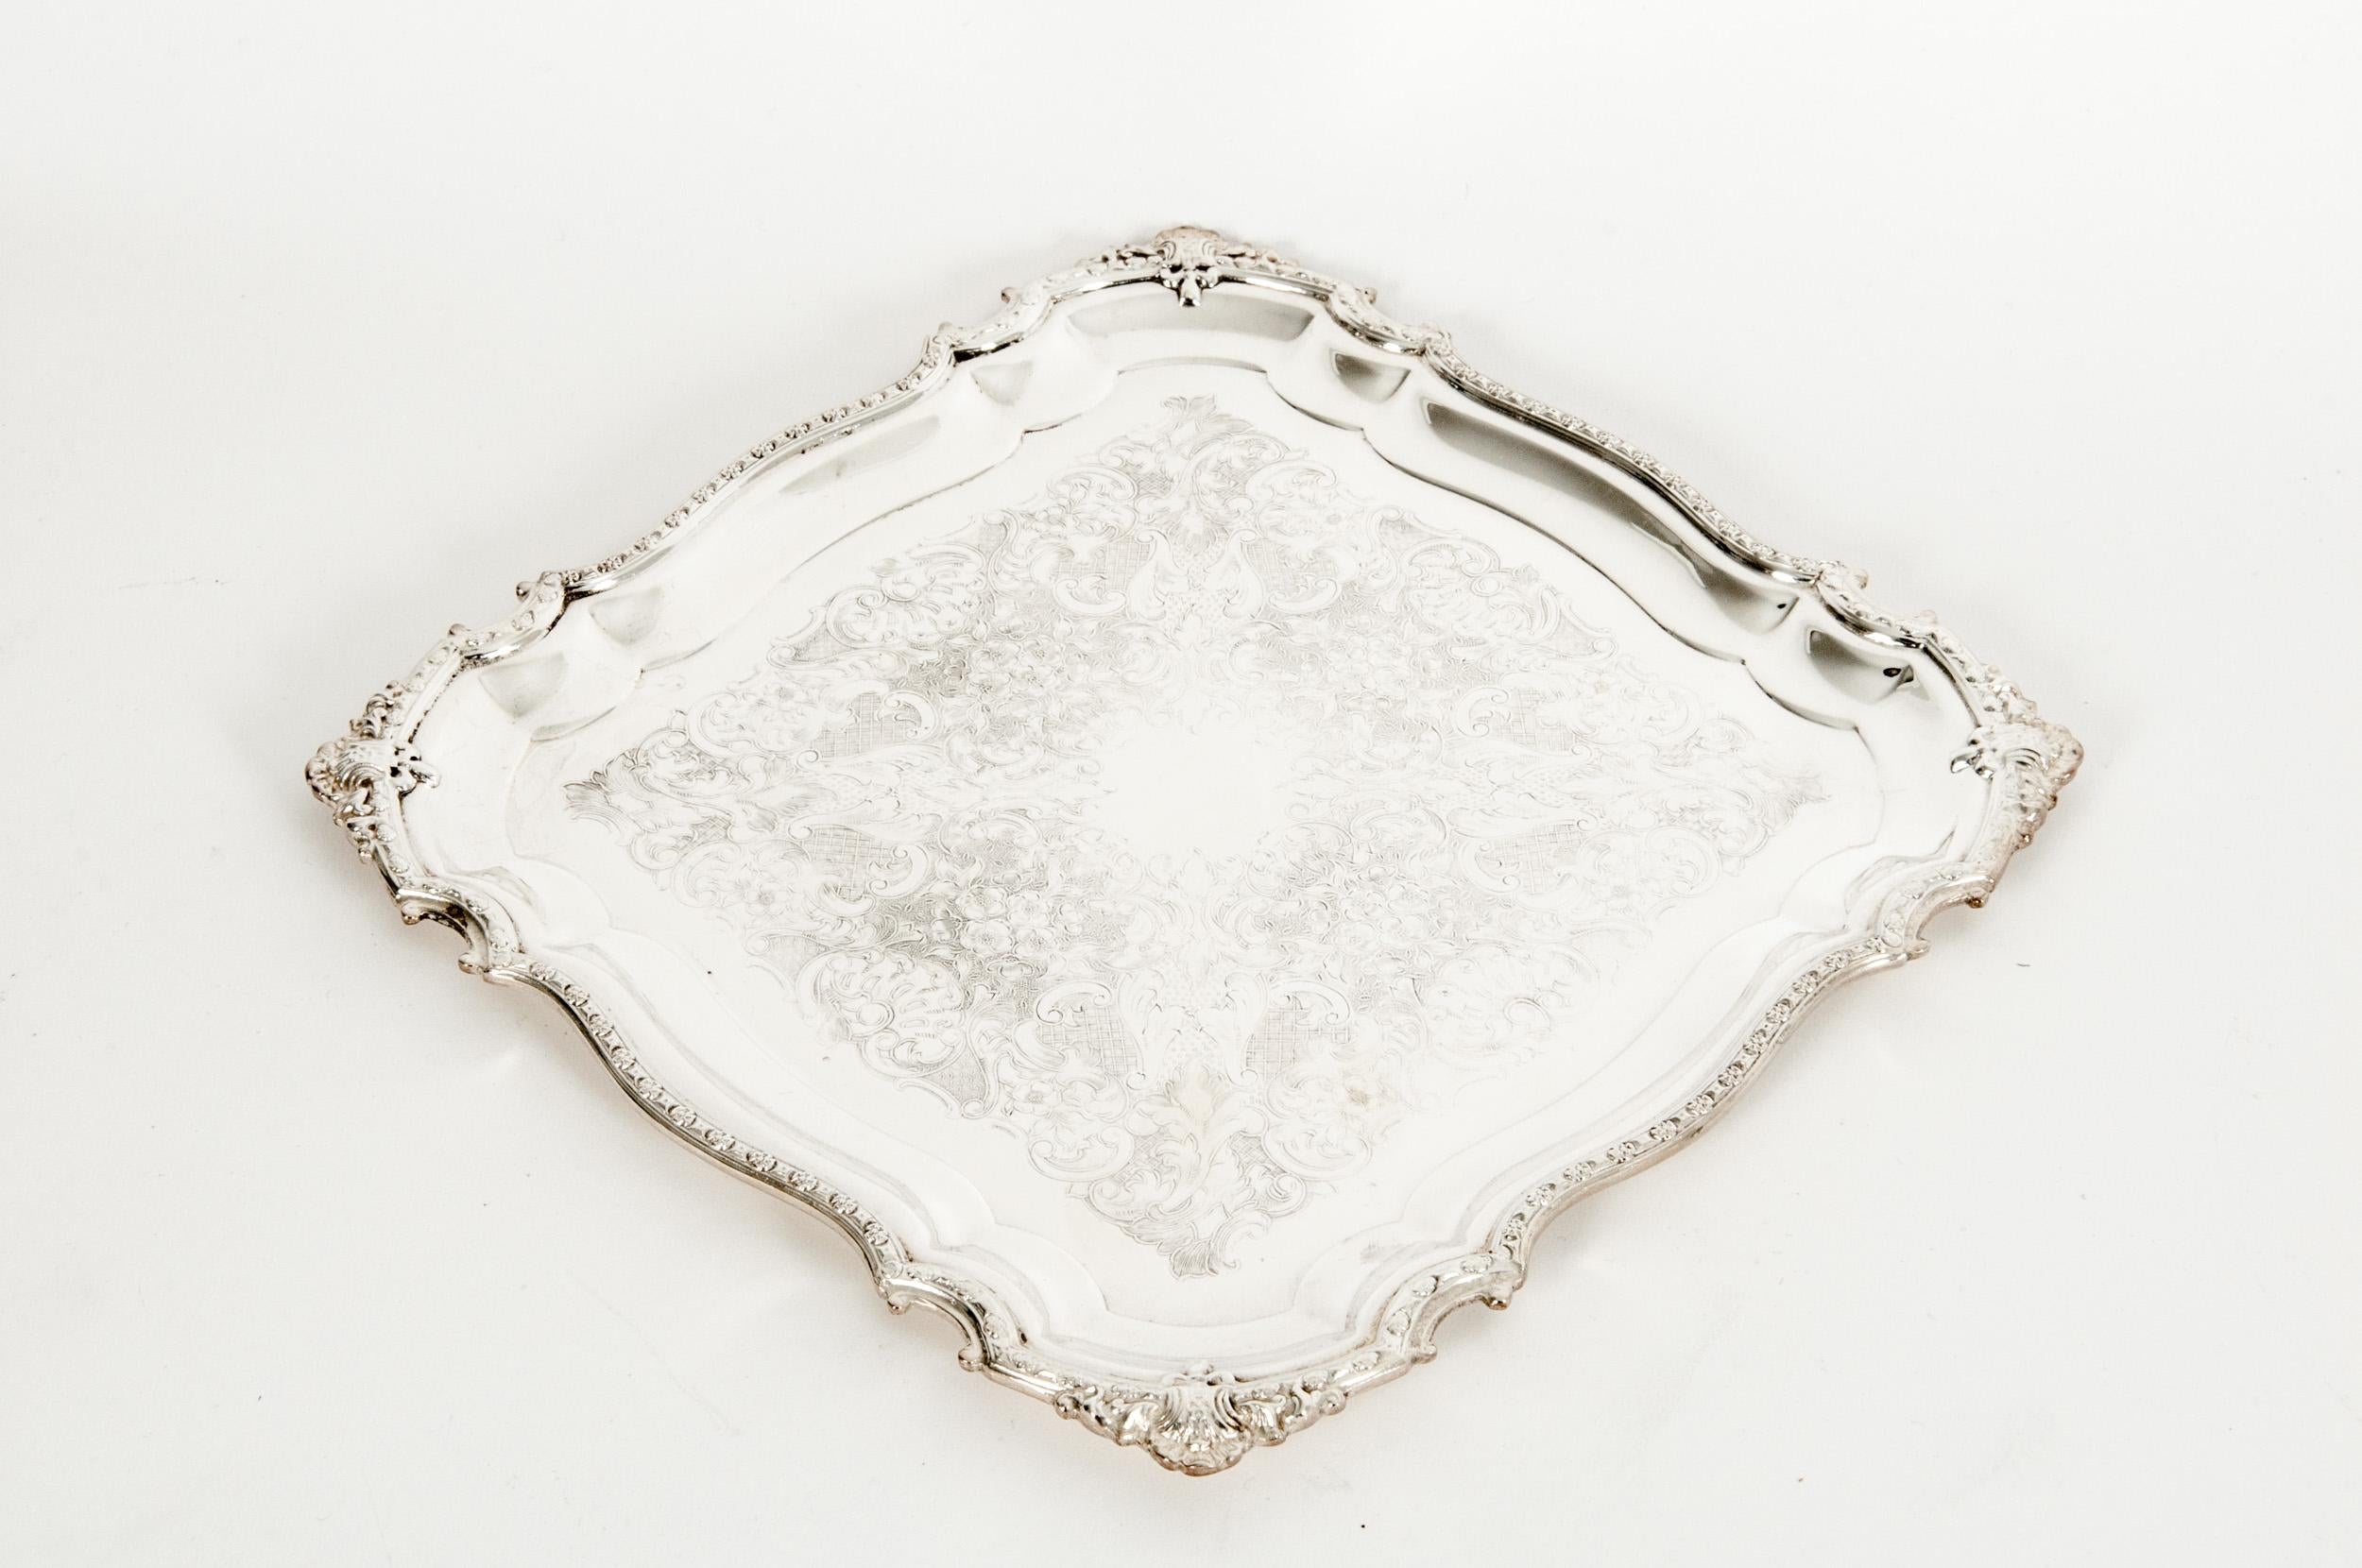 English silver plated Sheffield square shape barware / tableware serving tray with interior design details. The tray is in great condition. Minor wear consistent with age / use. Maker's mark undersigned. The tray is about 9 inches x 9 inches.